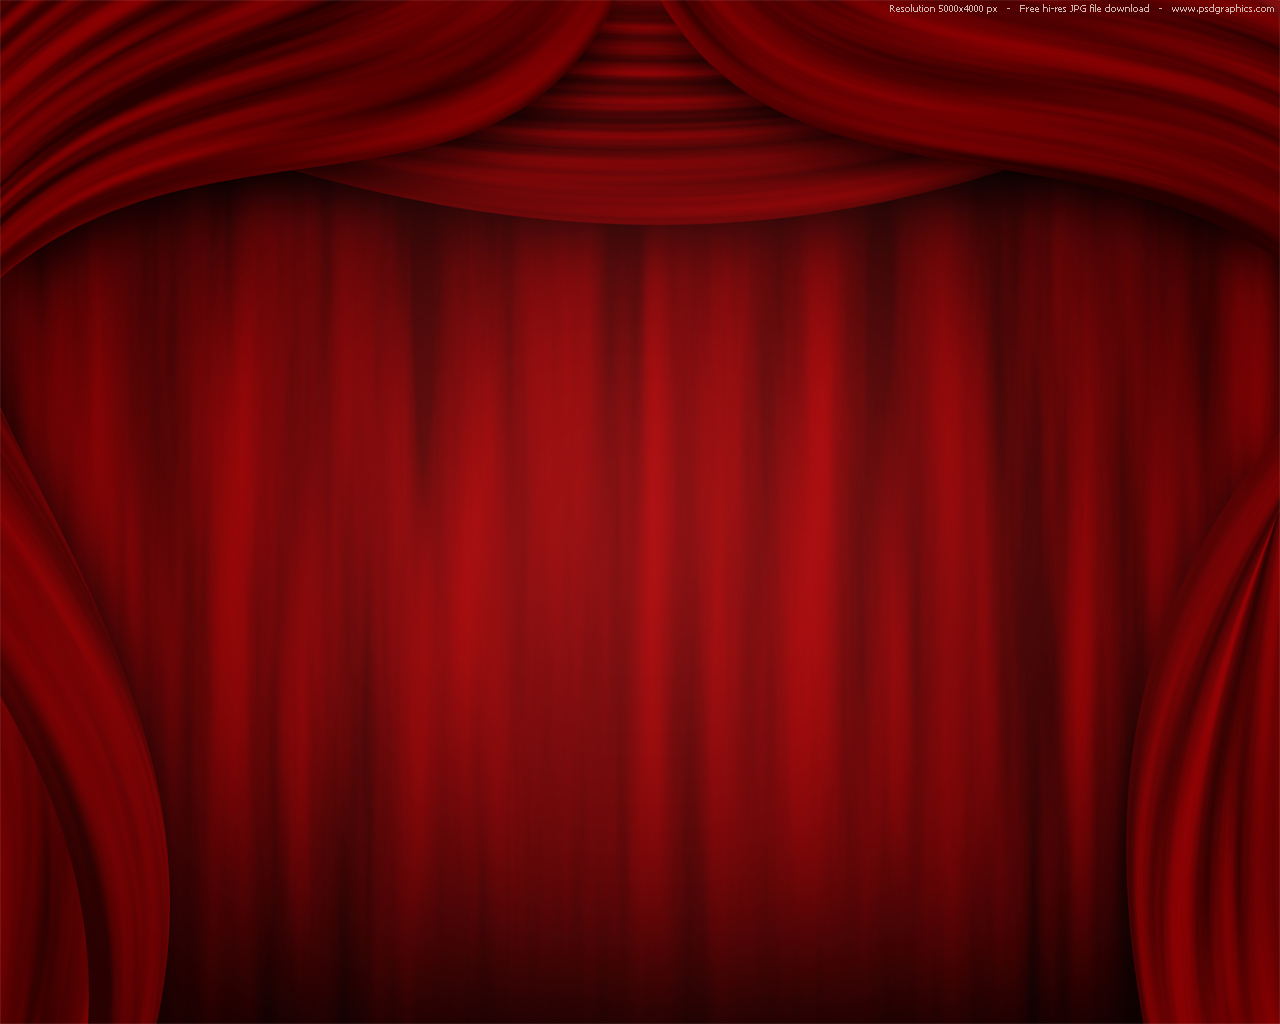 Red Curtain Background Theatre Stage Psdgraphics